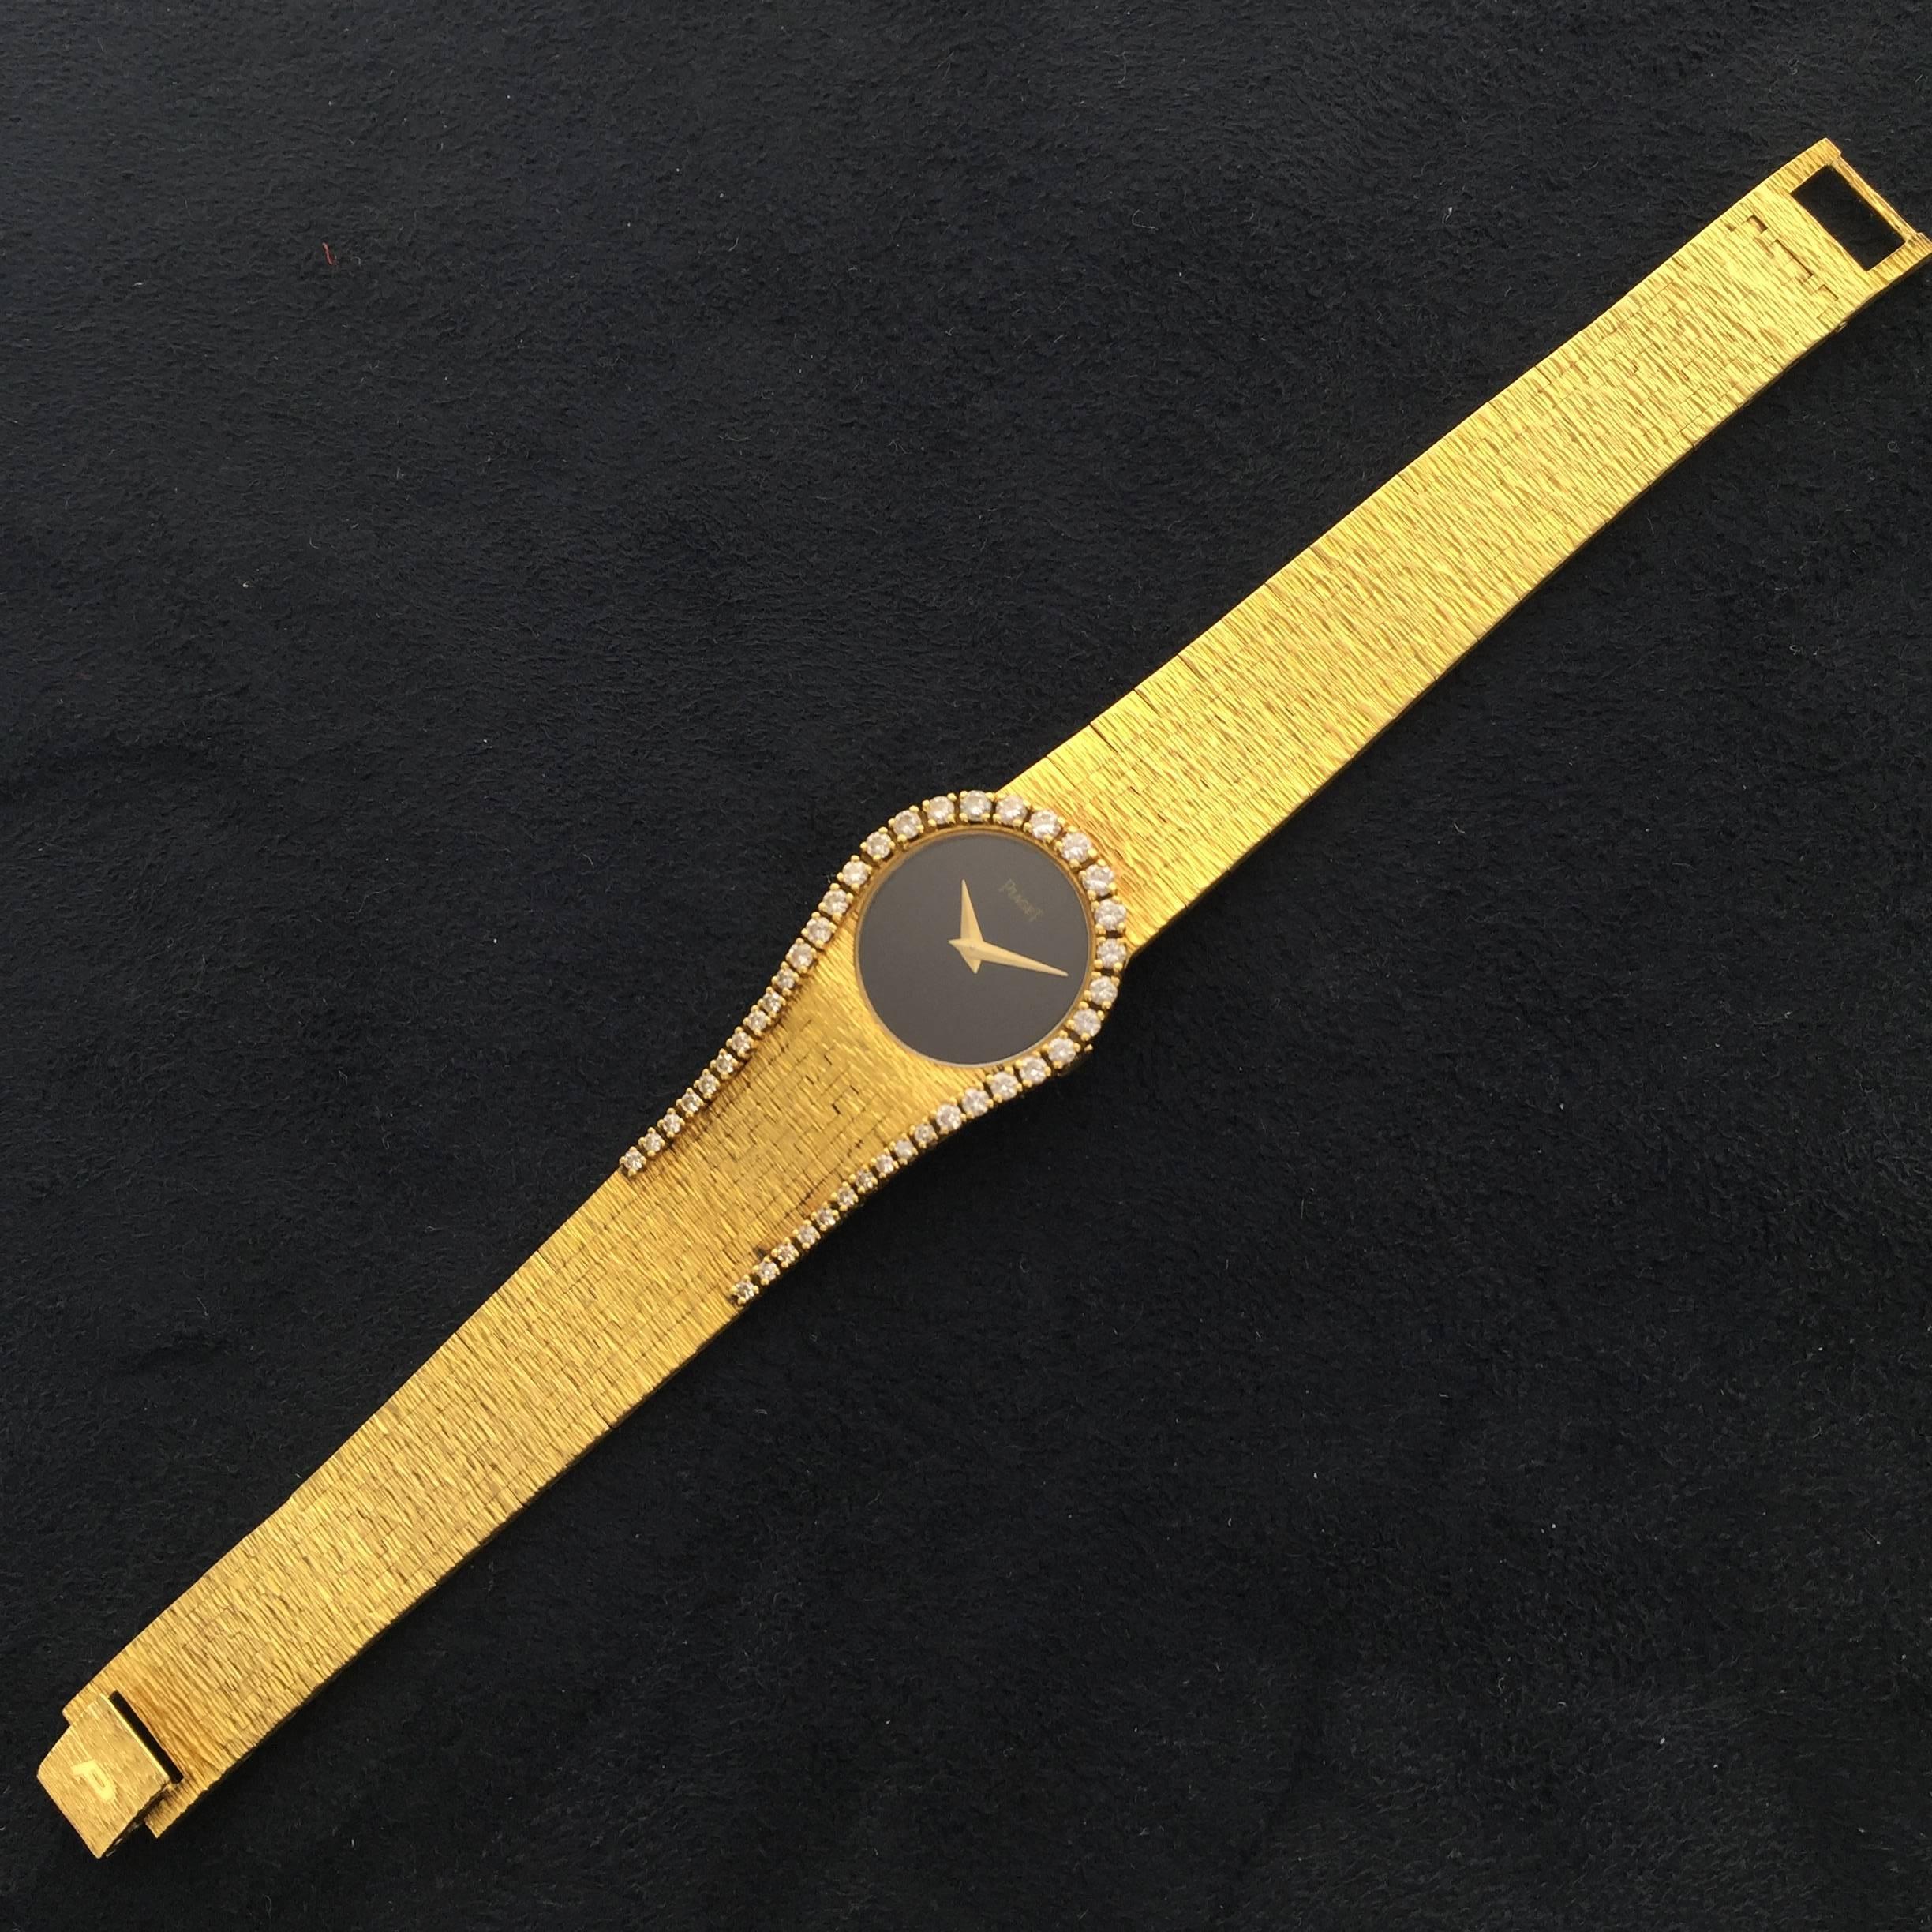 Circa 1970, this 18kyellow gold Piaget bracelet watch with bonyx dial and diamond horseshoe design. Textured geometric hand-finished bracelet. An elegant and rare lady's jewelry watch.